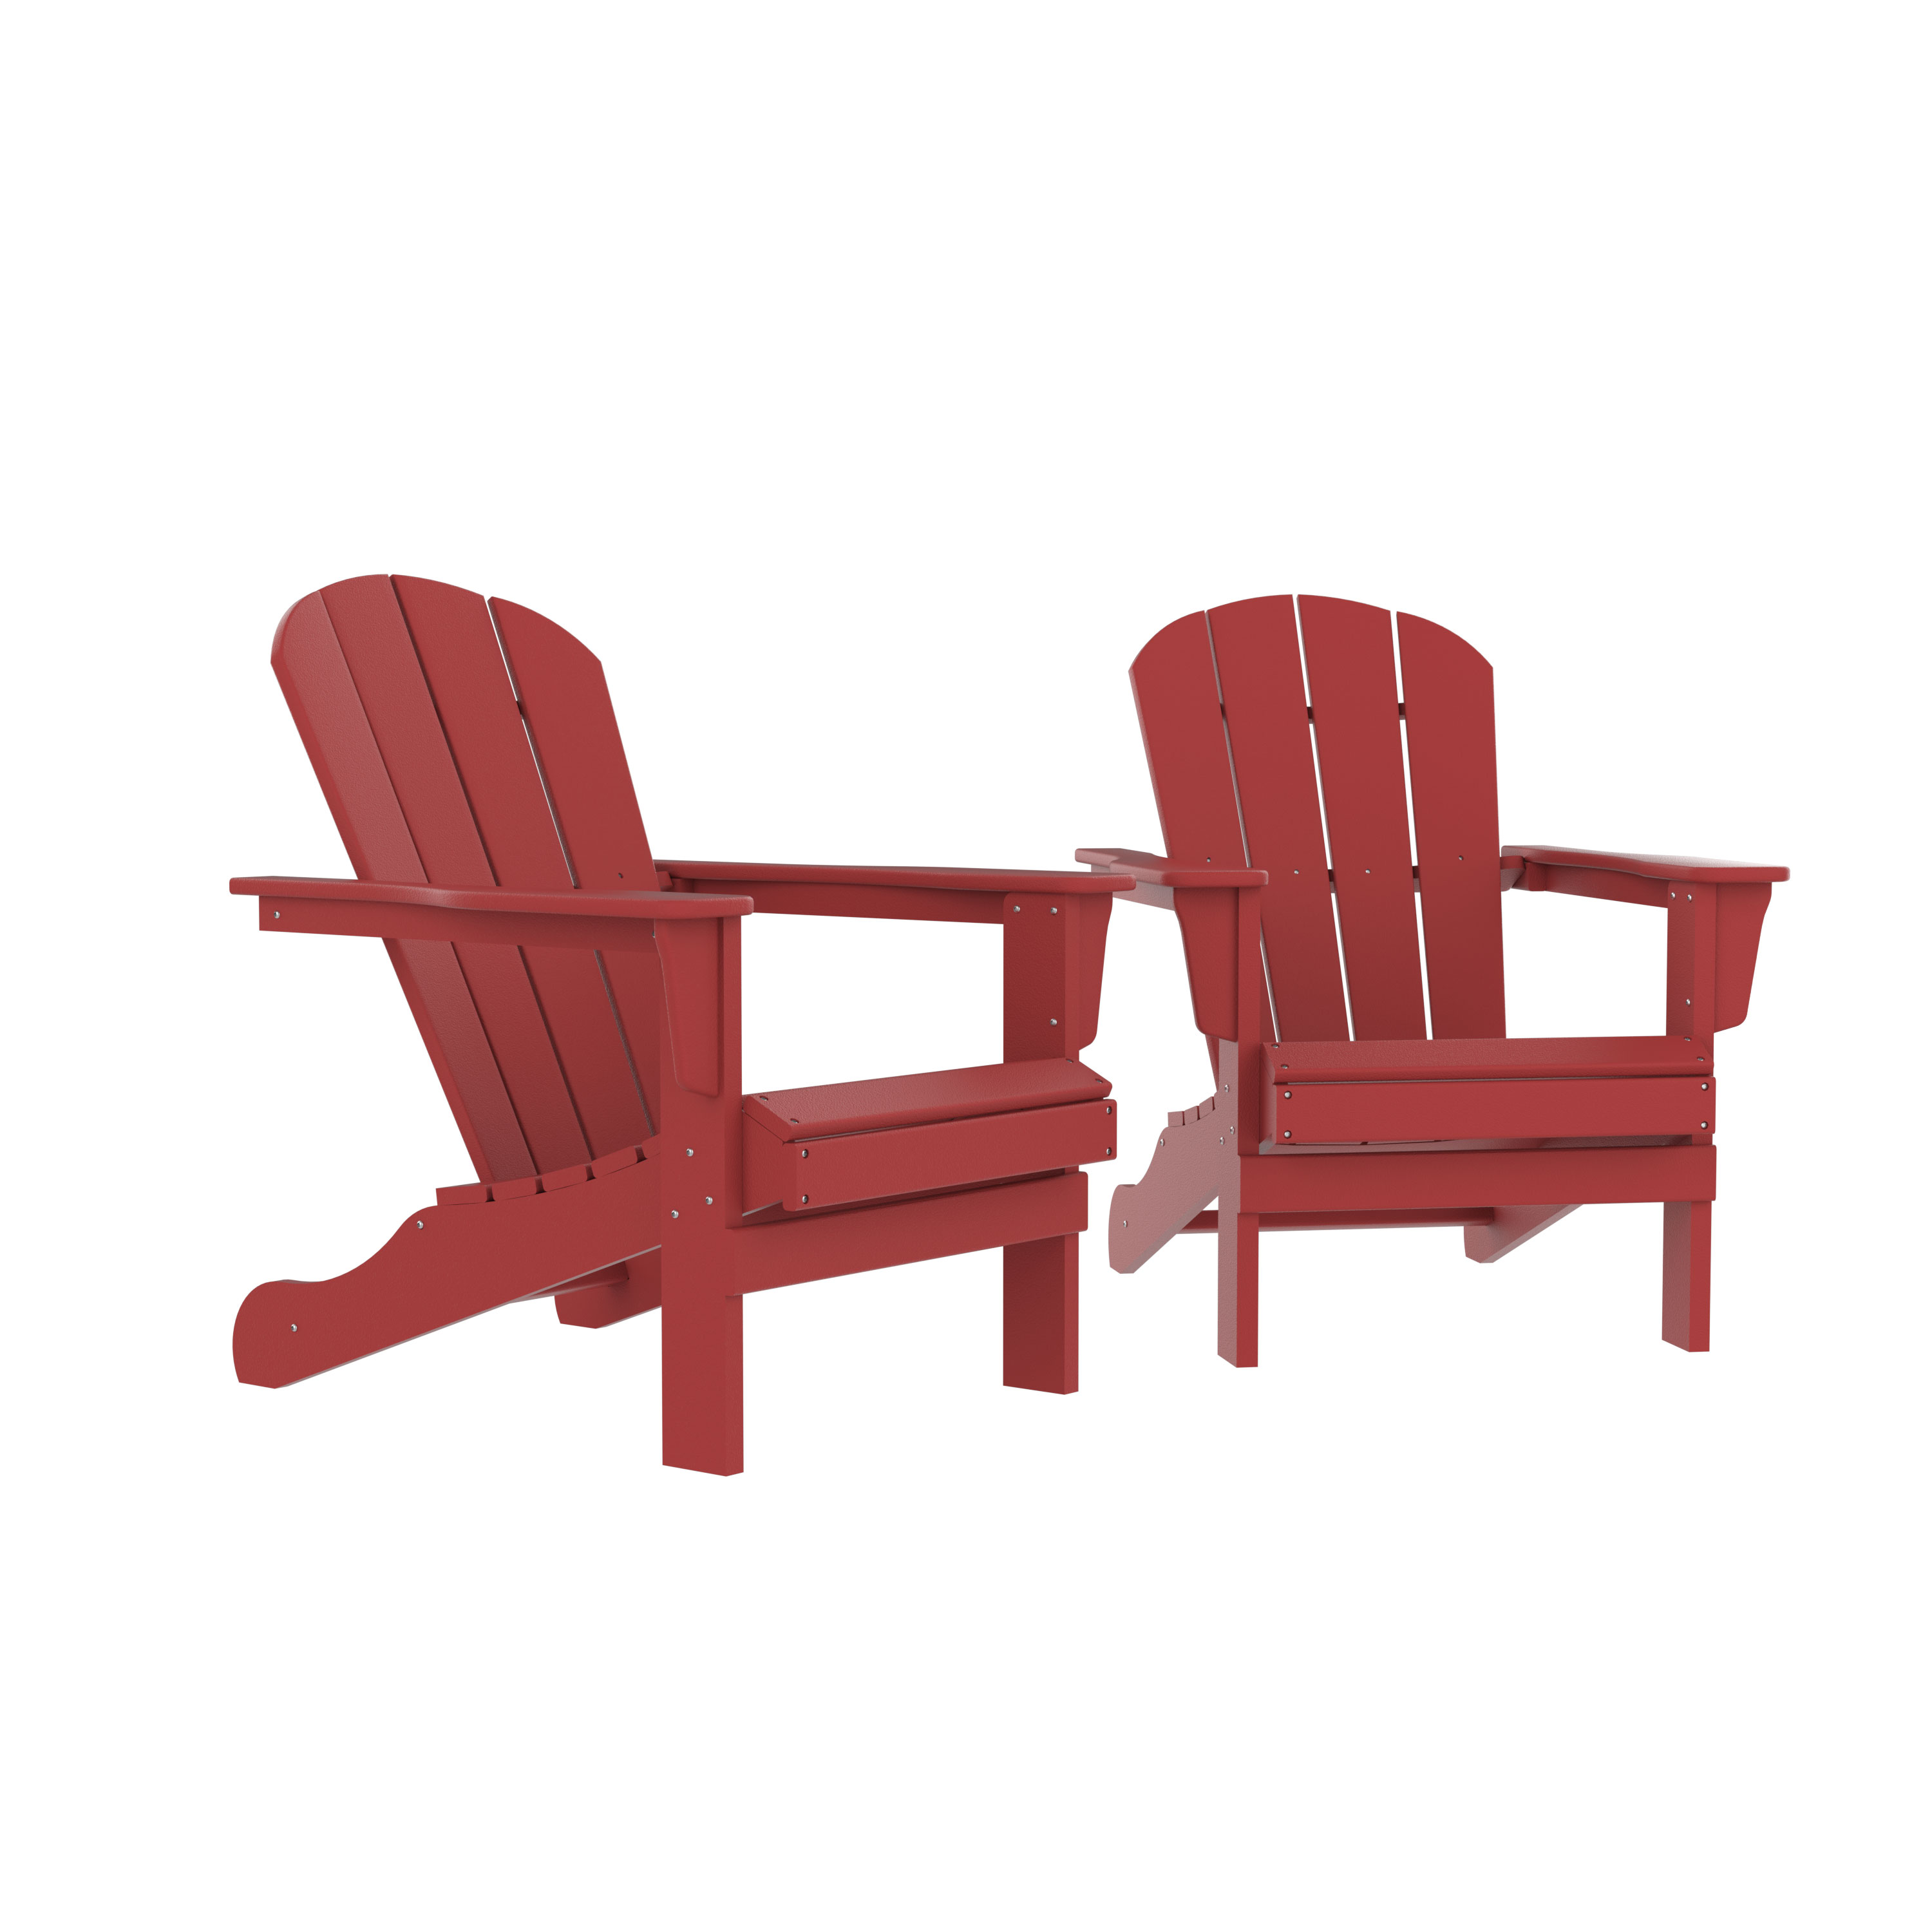 Clearance! HDPE Adirondack Chair, Fire Pit Chairs, Sand Chair, Patio Outdoor Chairs,DPE Plastic Resin Deck Chair, lawn chairs, Adult Size ,Weather Resistant for Patio/ Backyard/Garden, Red, Set of 2 - image 1 of 6